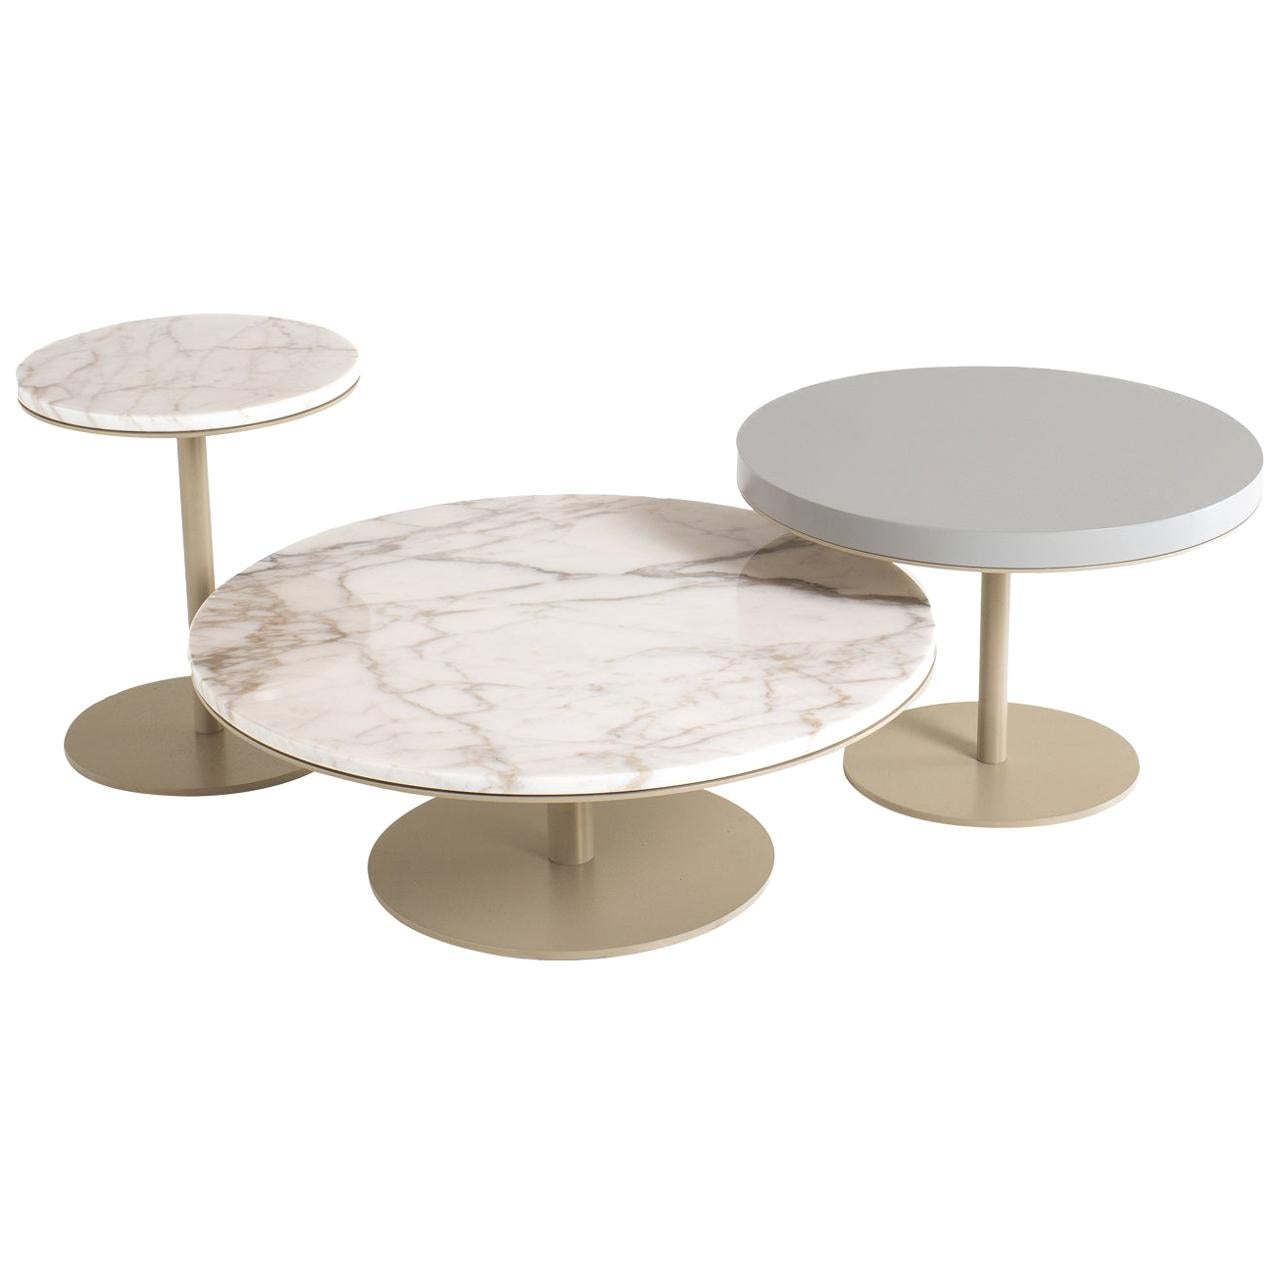 Set of 3 Round Serving Tables